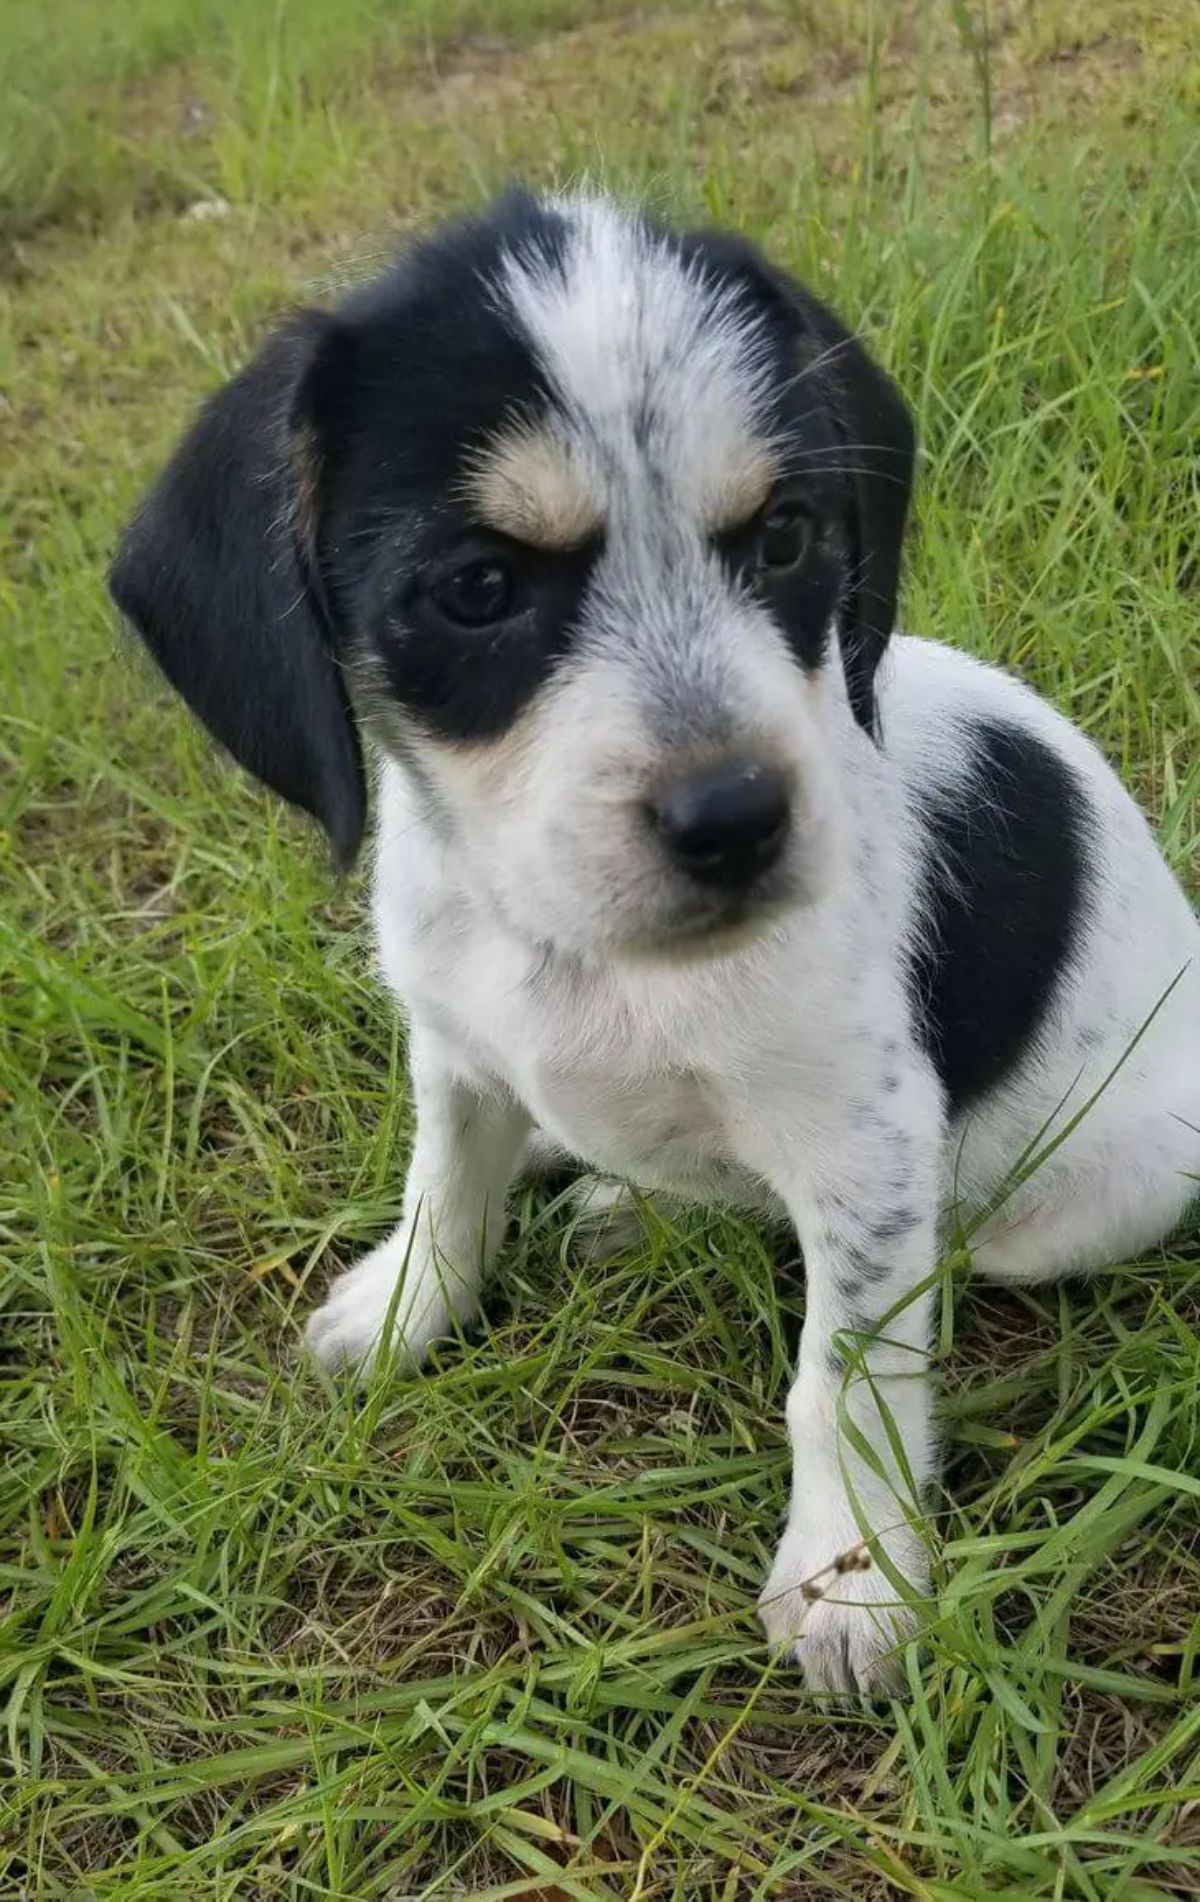 black and white puppy sitting on grass looking angry with black markings over the eyes